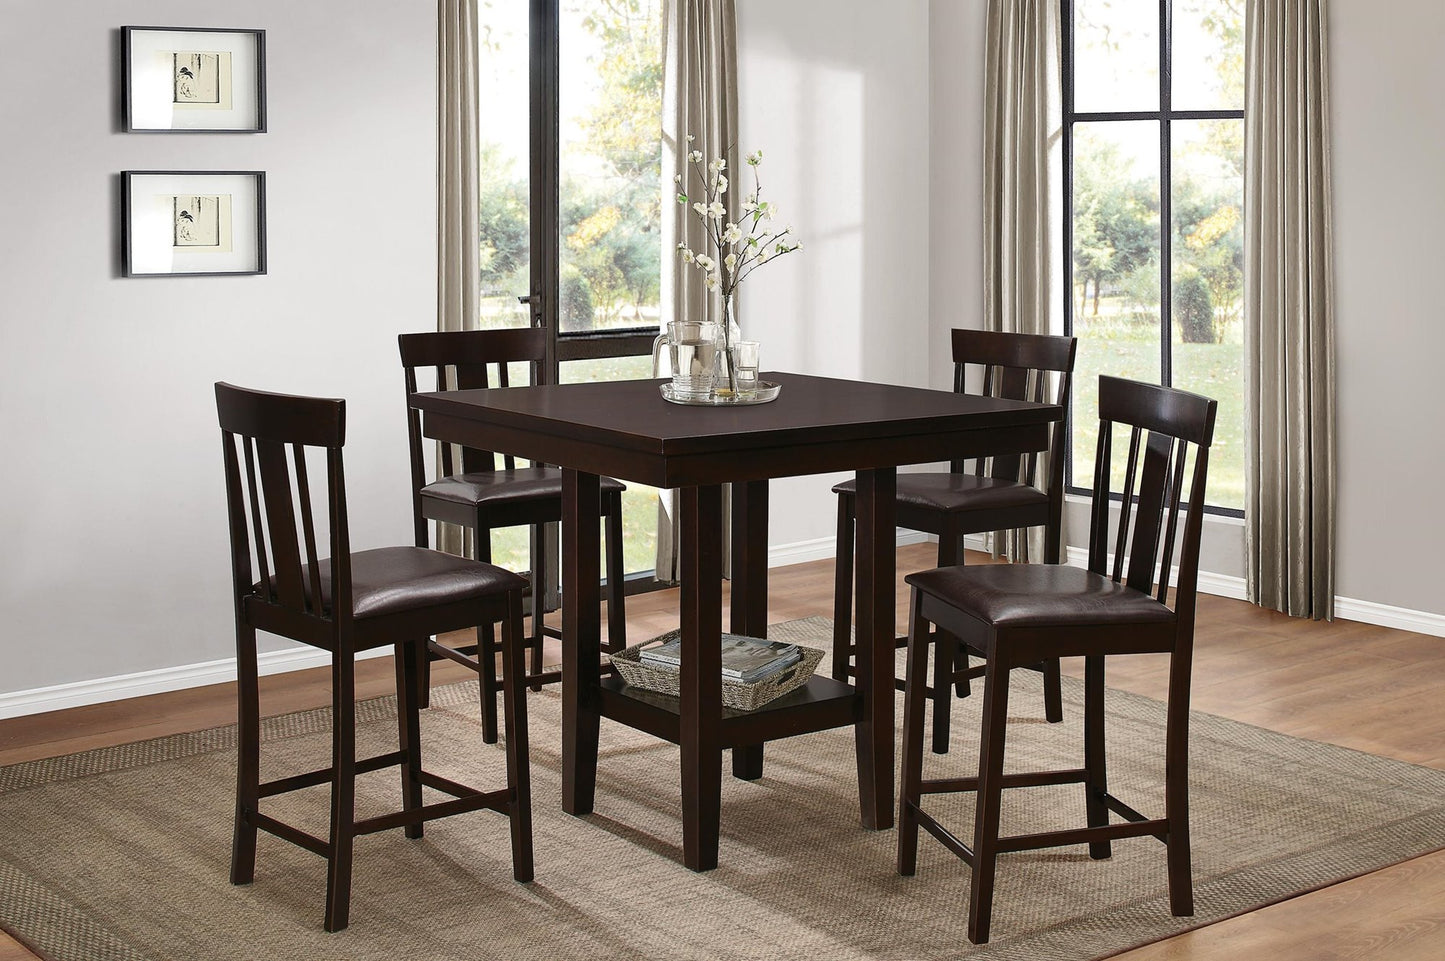 Homelegance Diego 5PC Counter Height Dining Set Table, 4 Chair in Espresso